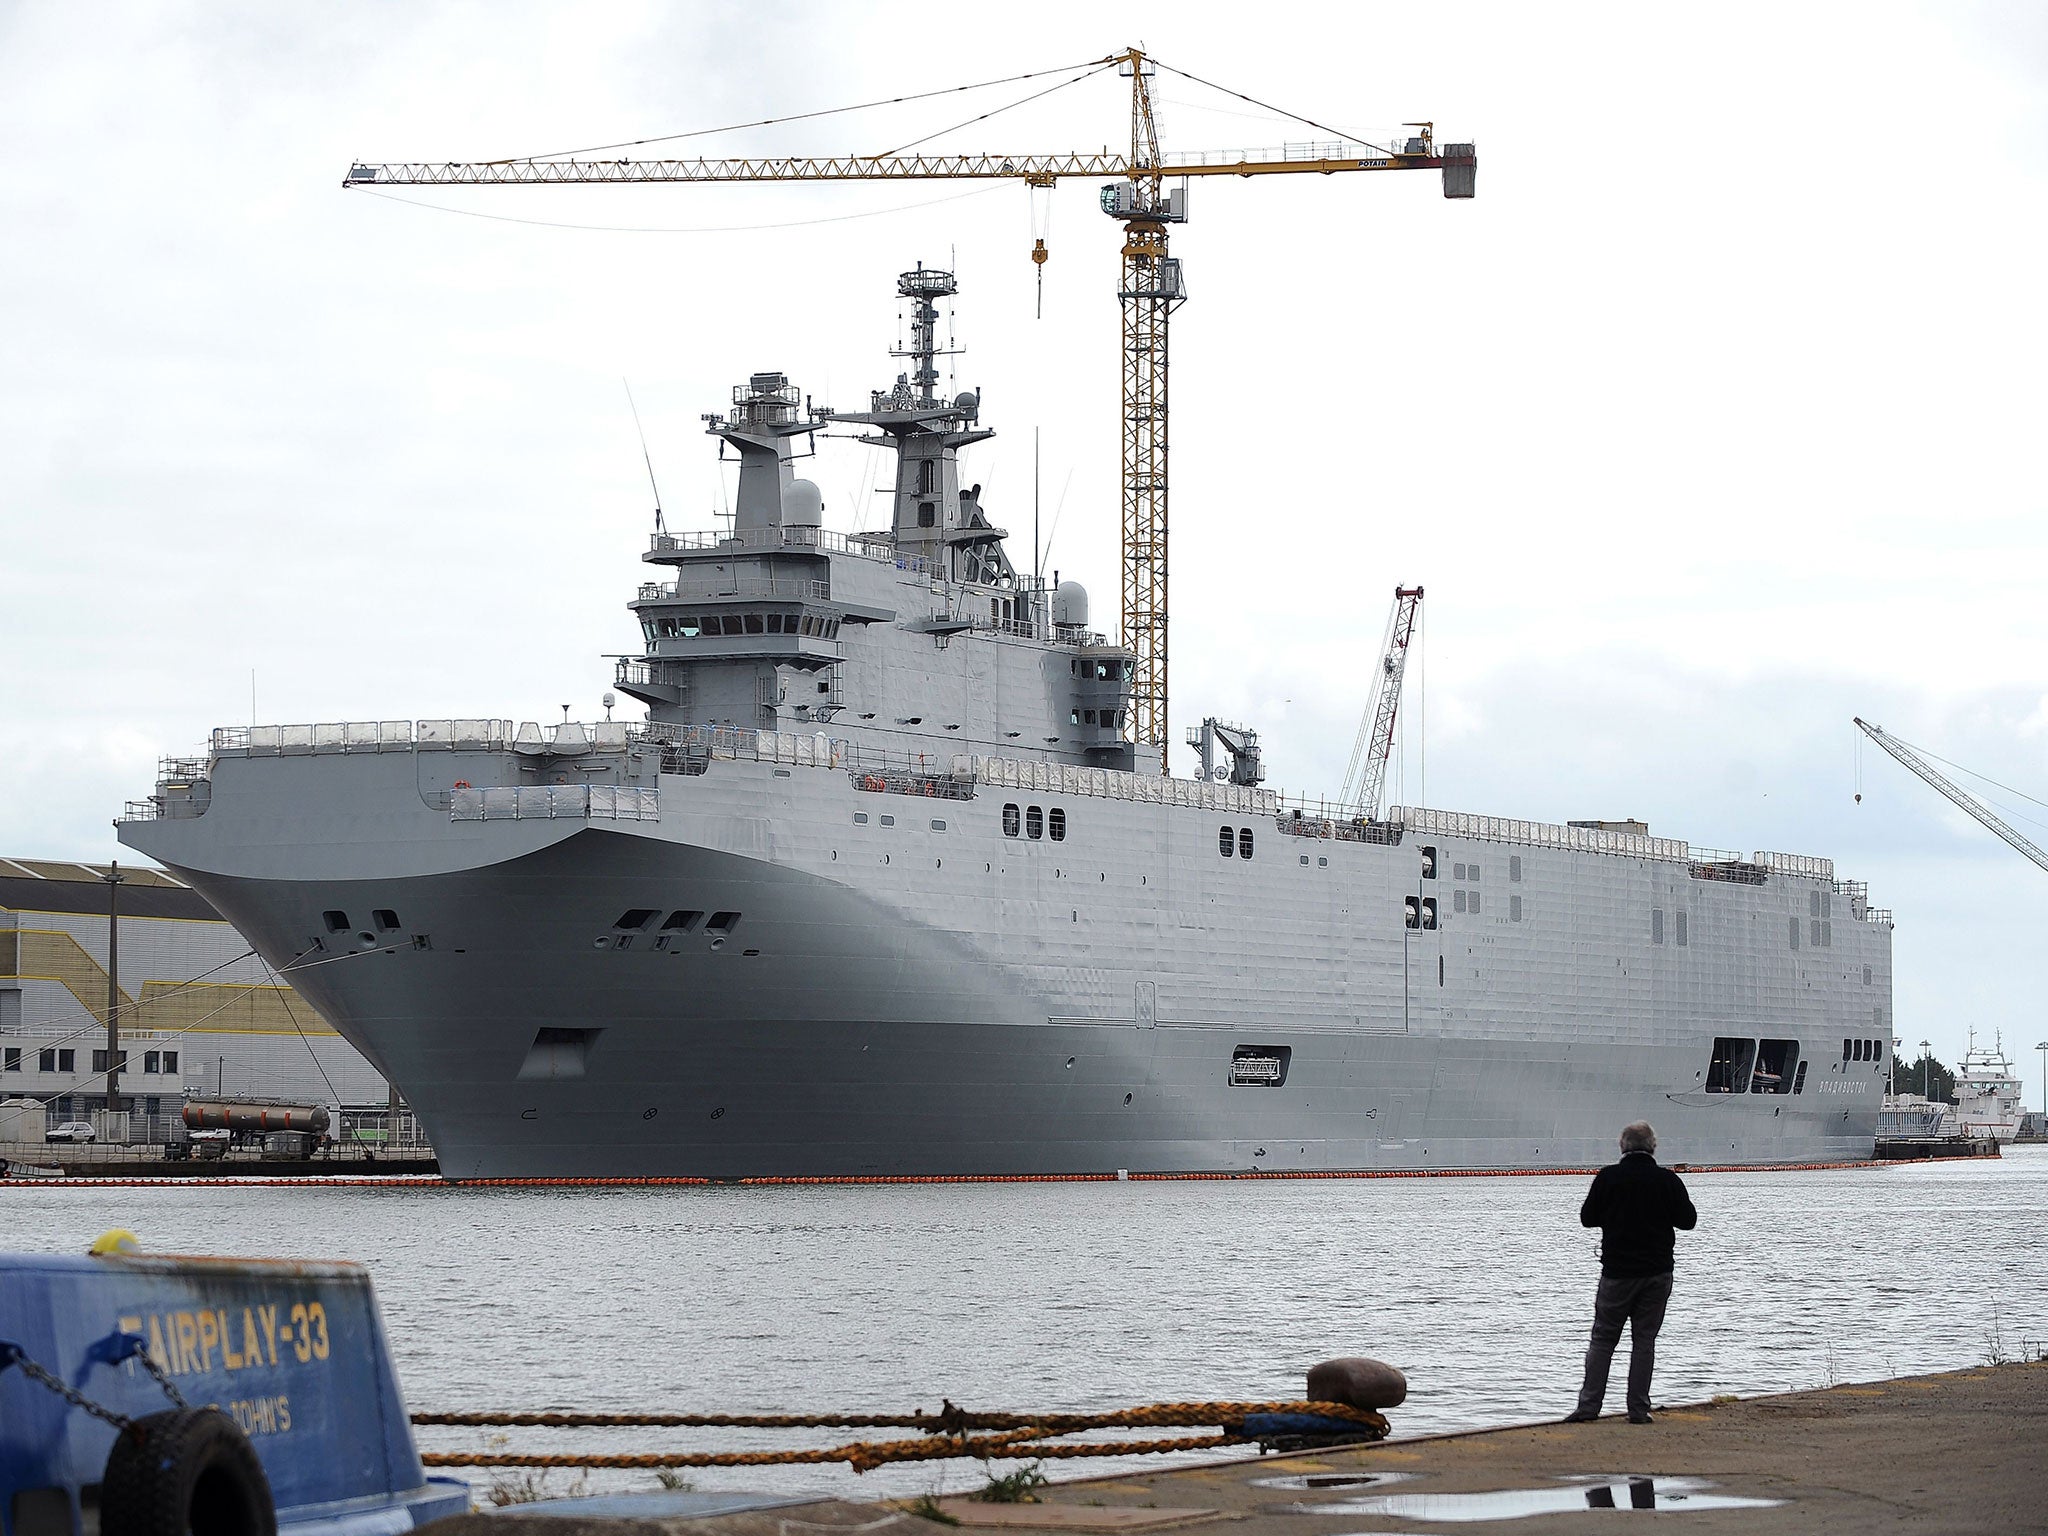 File image taken on 9 May, 2014 in Saint-Nazaire shows the Vladivostok warship, a Mistral class helicopter carrier ordered by Russia